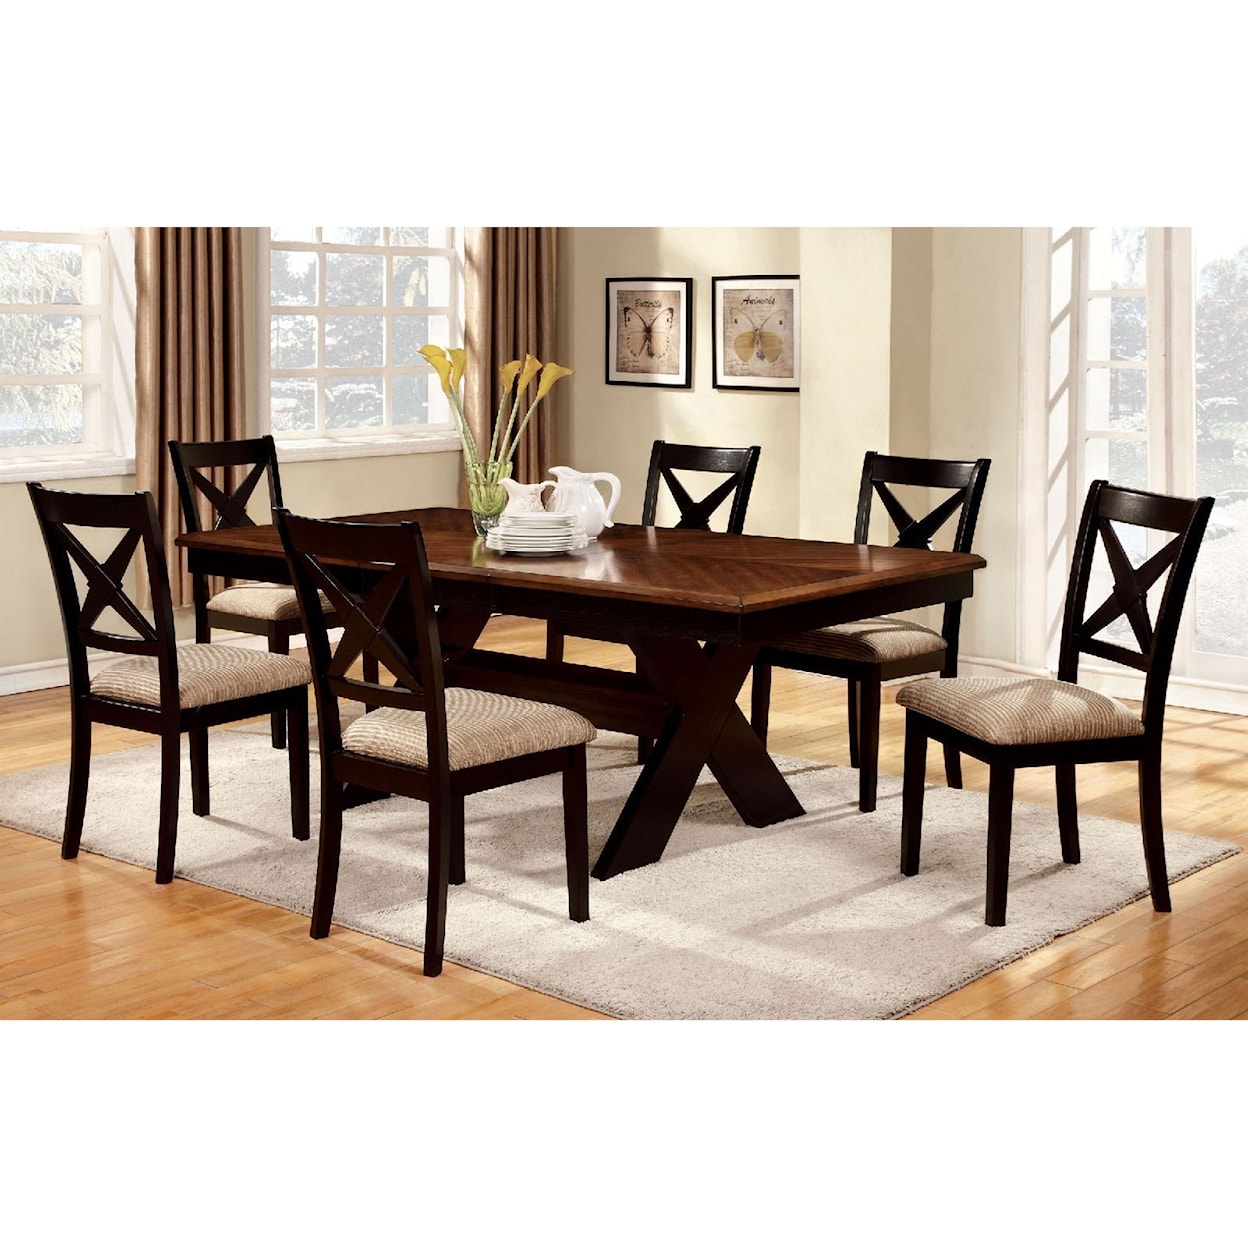 Furniture of America Liberta Table and 6 Side Chairs